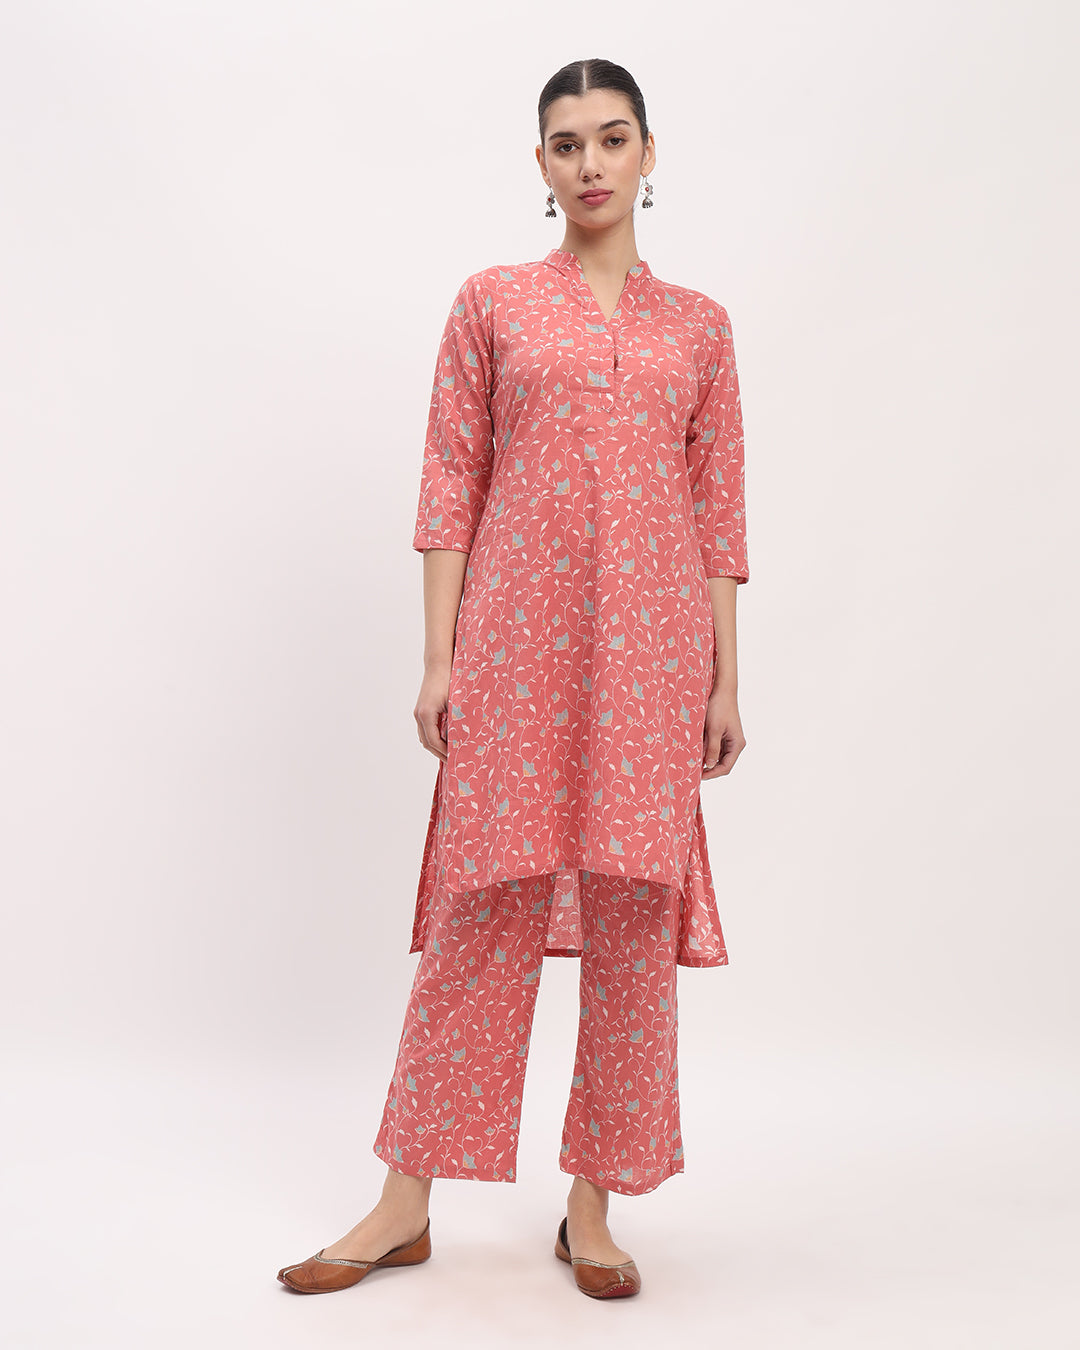 Combo: Lavender Paisley & English Floral Garden High-Low Printed Kurta (Without Bottoms)